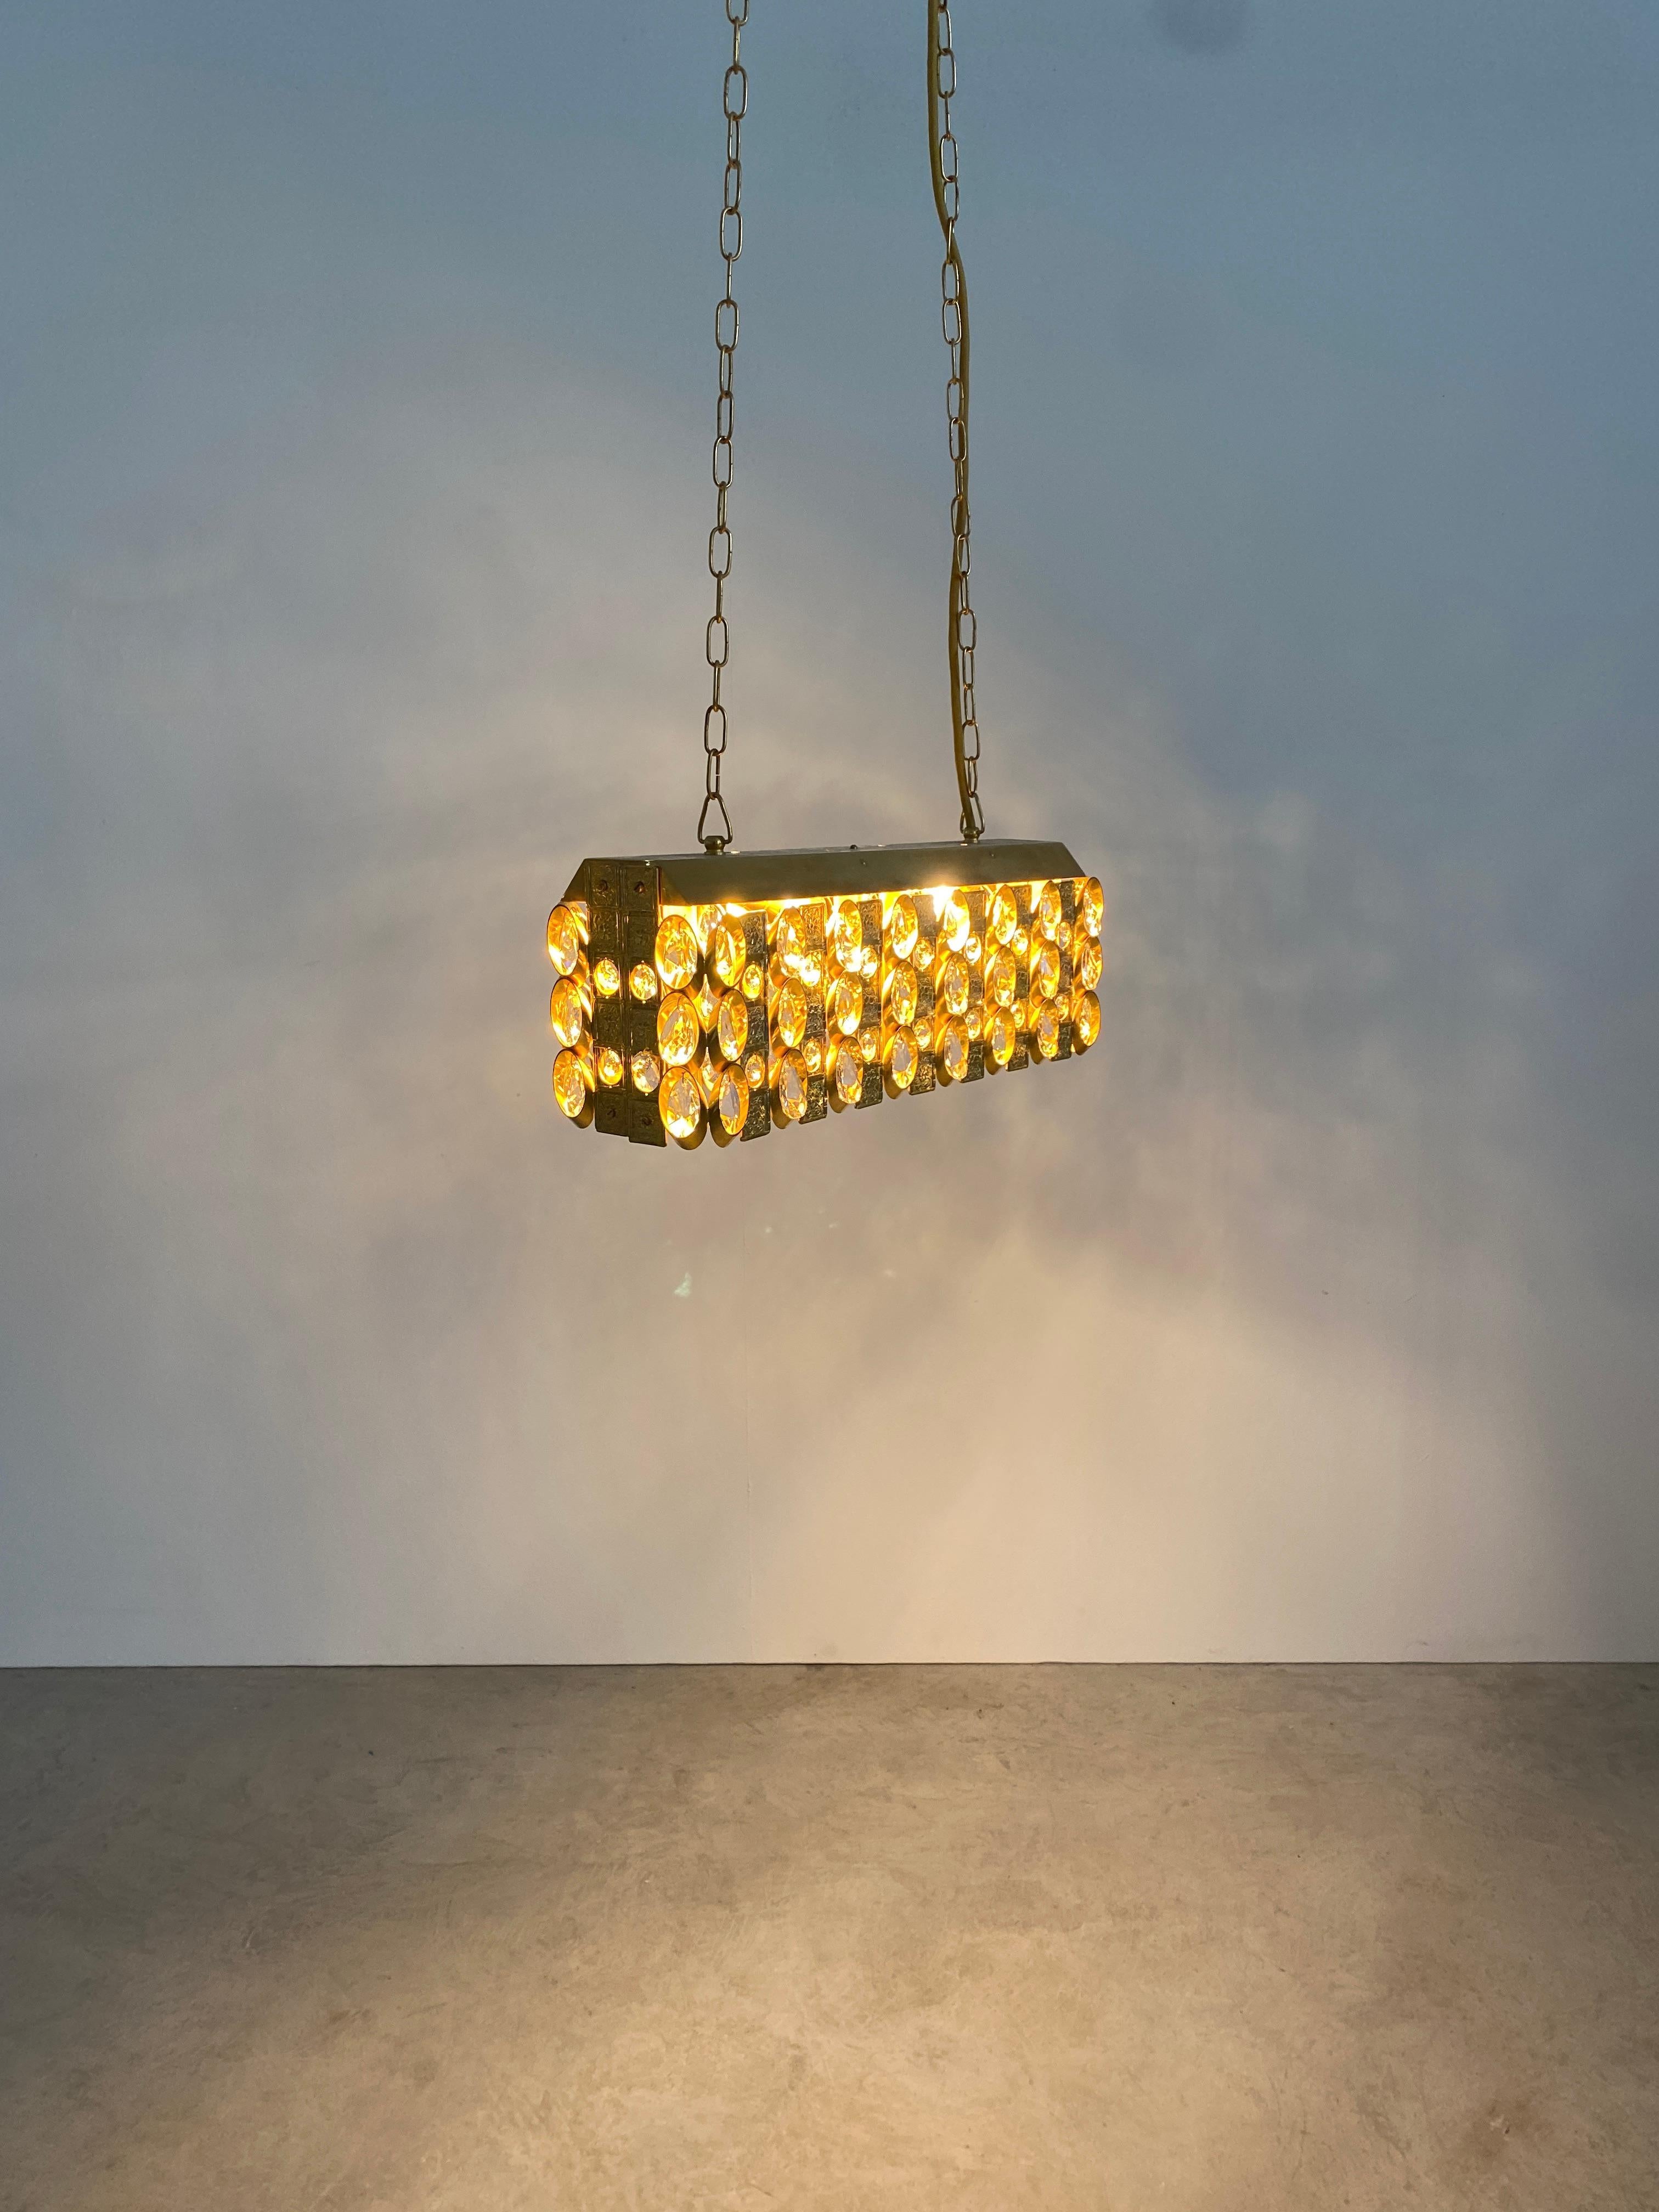 Rare rectangular chandelier from brass and glass by Palwa, Germany

Delicate ceiling light in good, refurbished condition (it has been professionally cleaned, rewired) and holds 4 bulbs e14 with 40W max each, Led's are possible. (max. 60W per